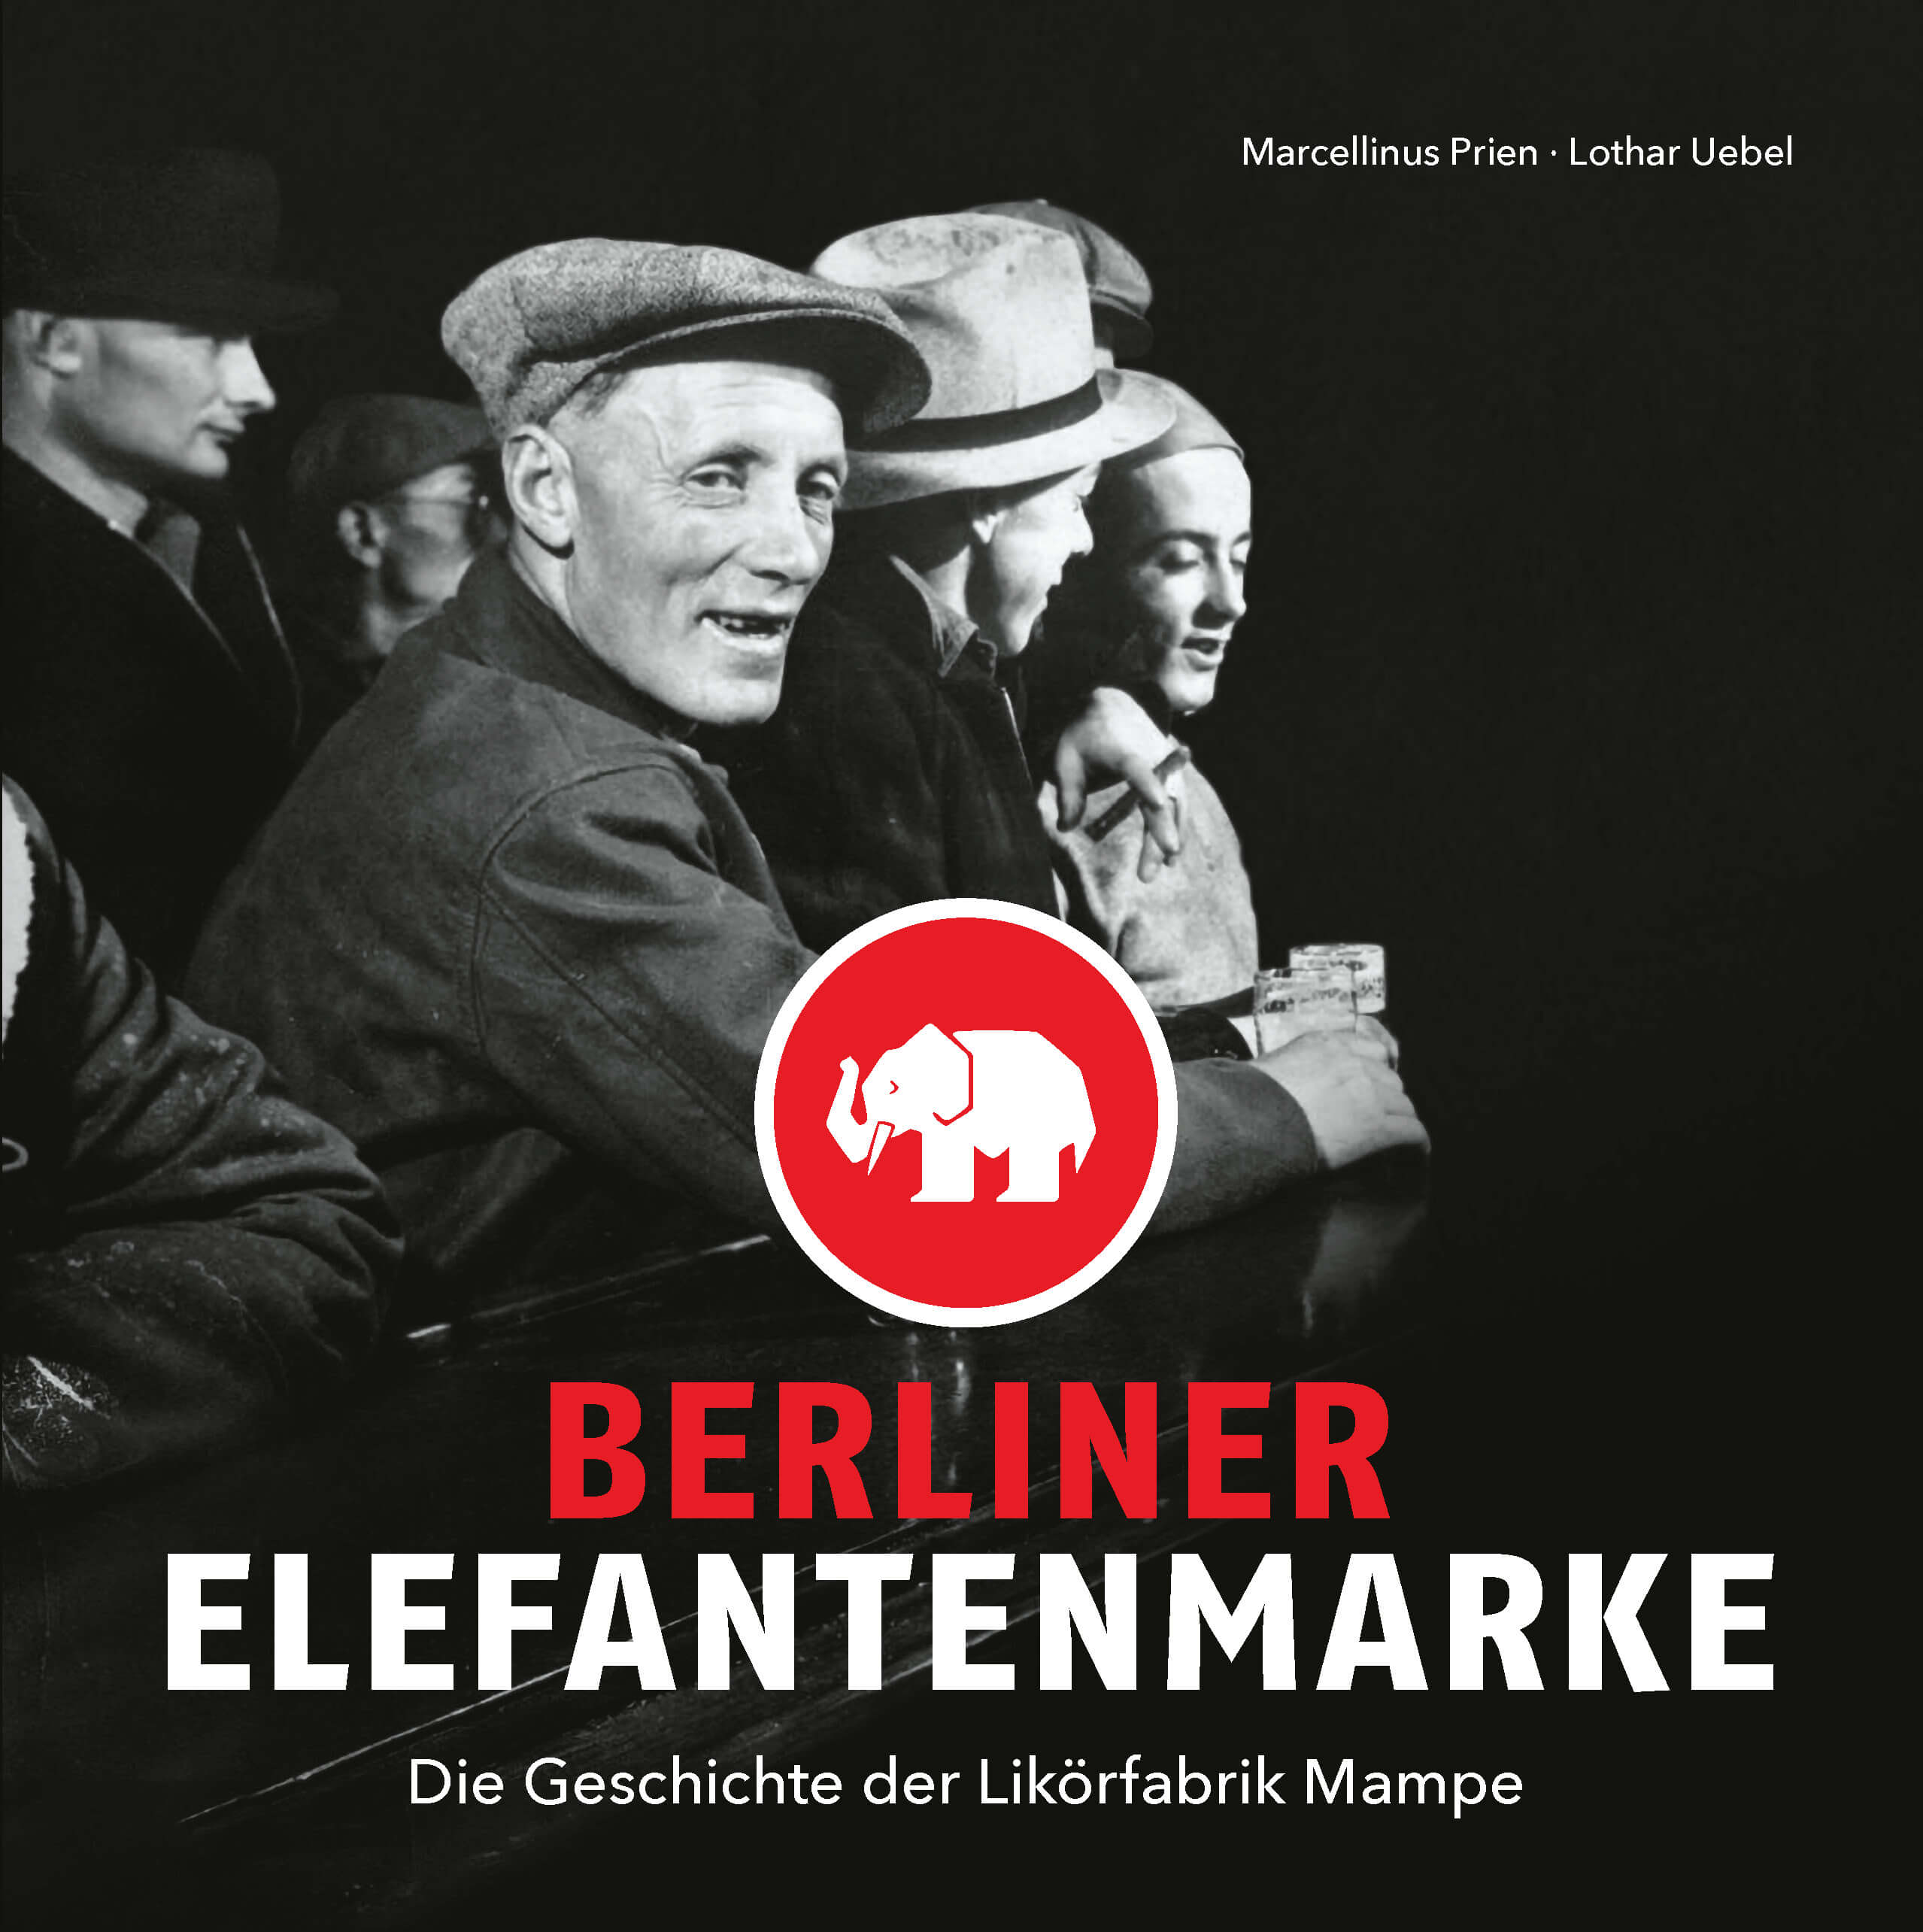 The Mampe book - Berlin elephant brand: The history of the Mampe liqueur factory